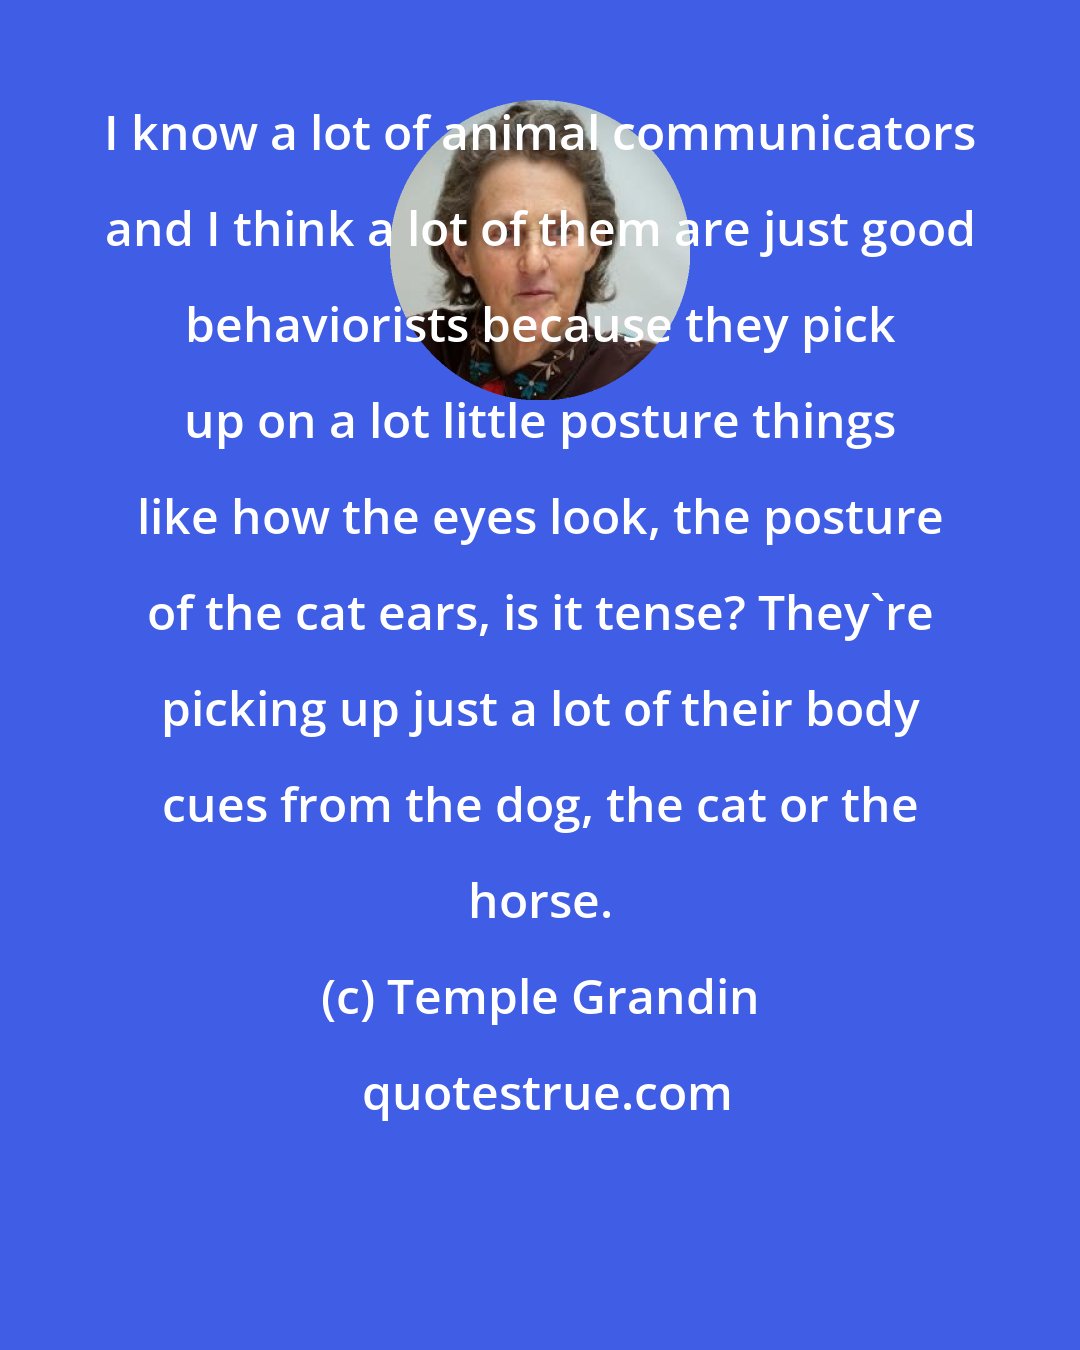 Temple Grandin: I know a lot of animal communicators and I think a lot of them are just good behaviorists because they pick up on a lot little posture things like how the eyes look, the posture of the cat ears, is it tense? They're picking up just a lot of their body cues from the dog, the cat or the horse.